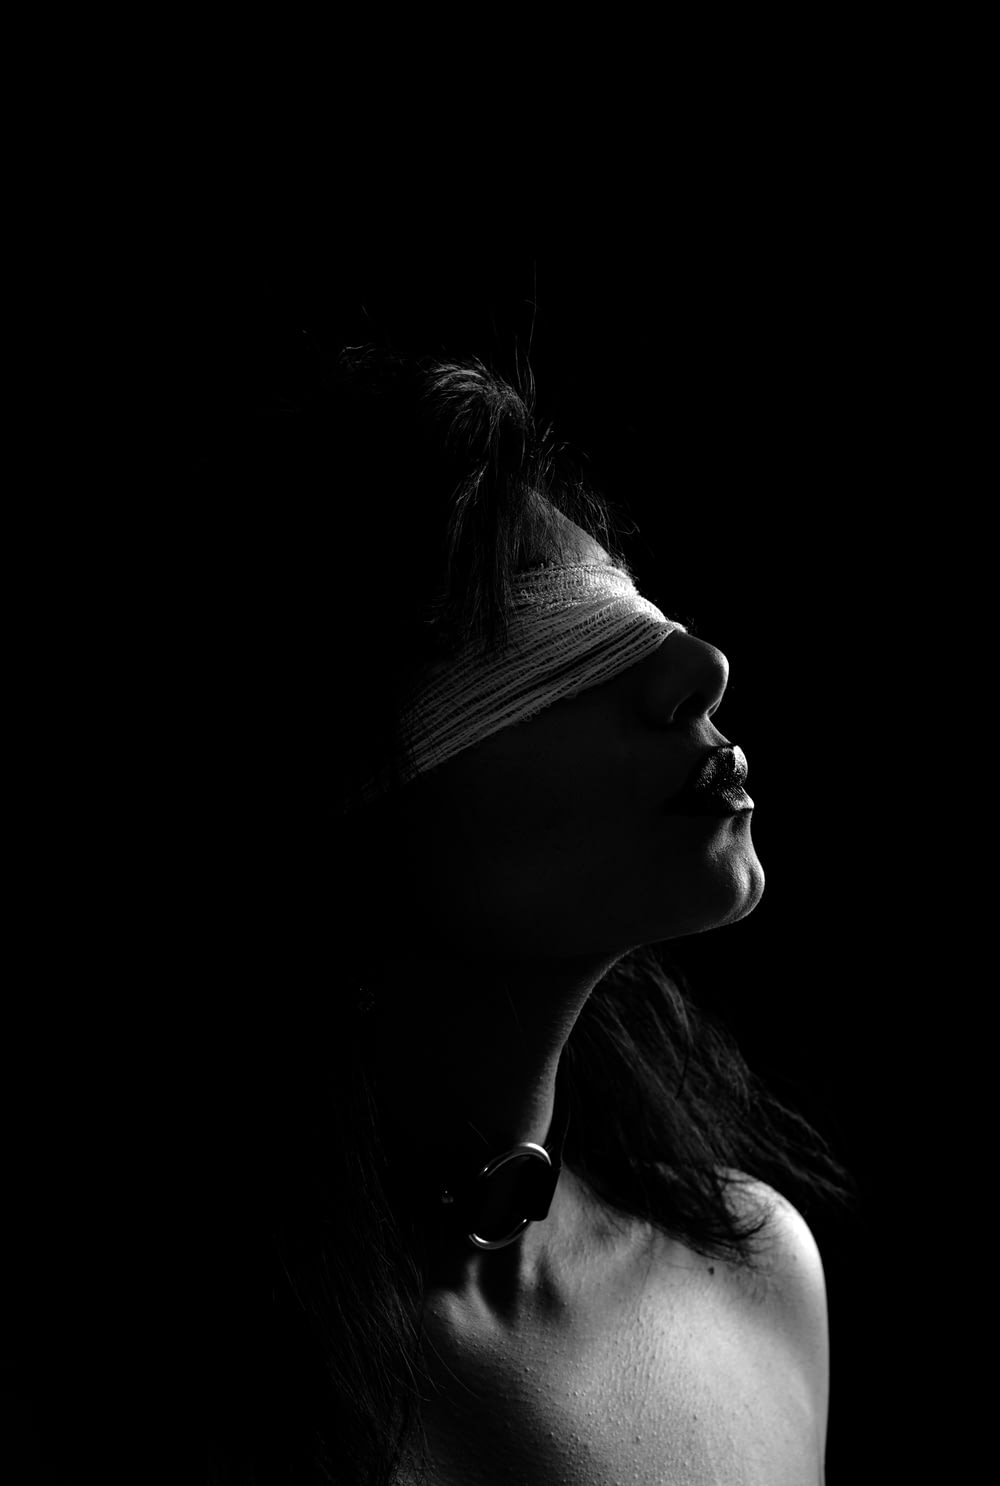 grayscale photography of woman wearing blindfold